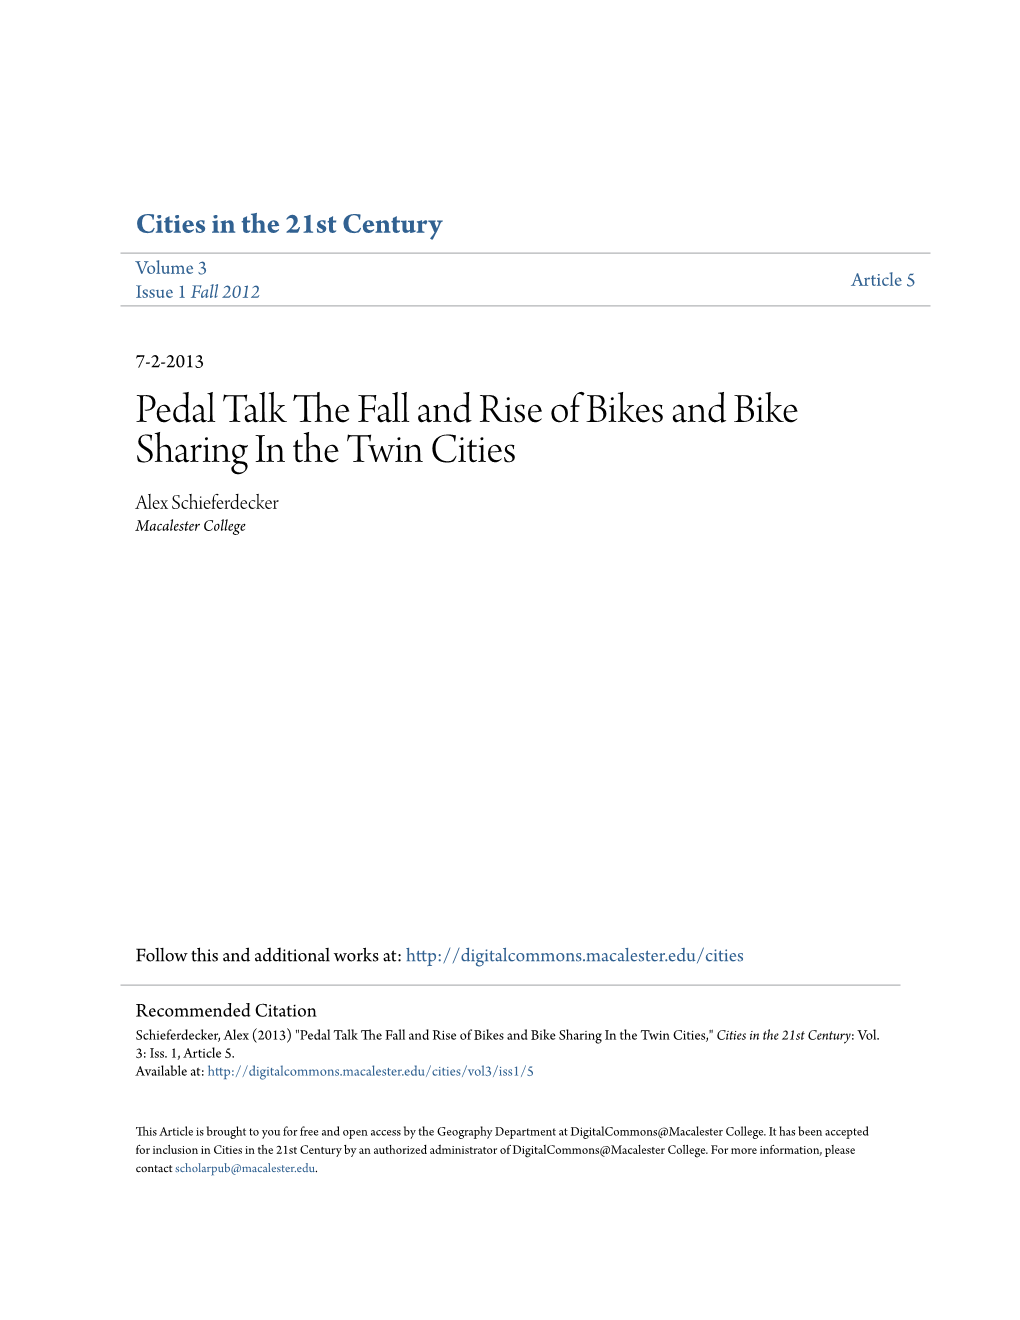 Pedal Talk the Fall and Rise of Bikes and Bike Sharing in the Twin Cities